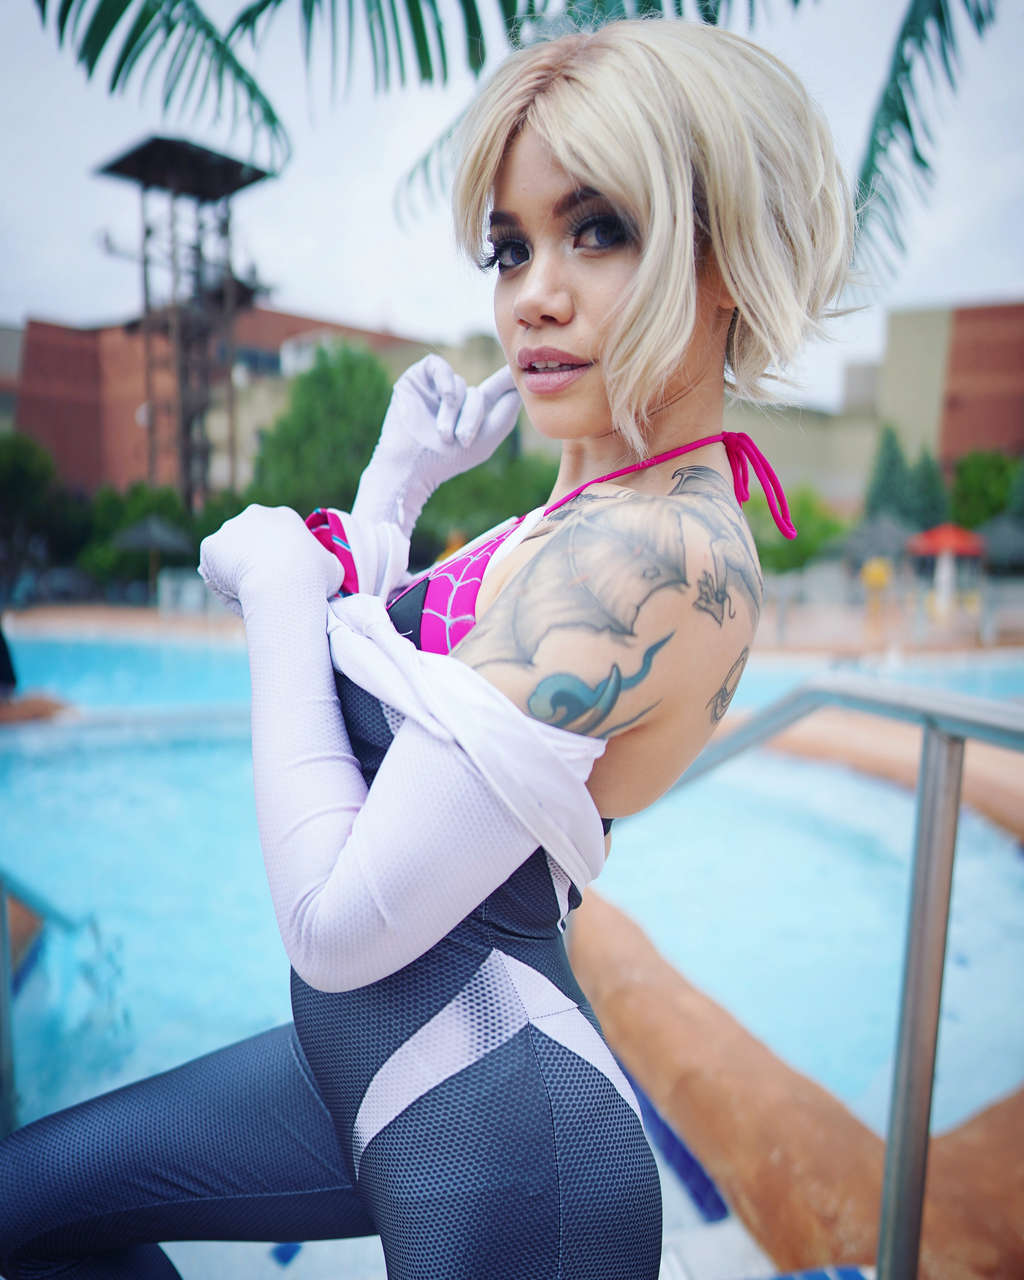 Spider Gwen At The Pool By Elrecacospla